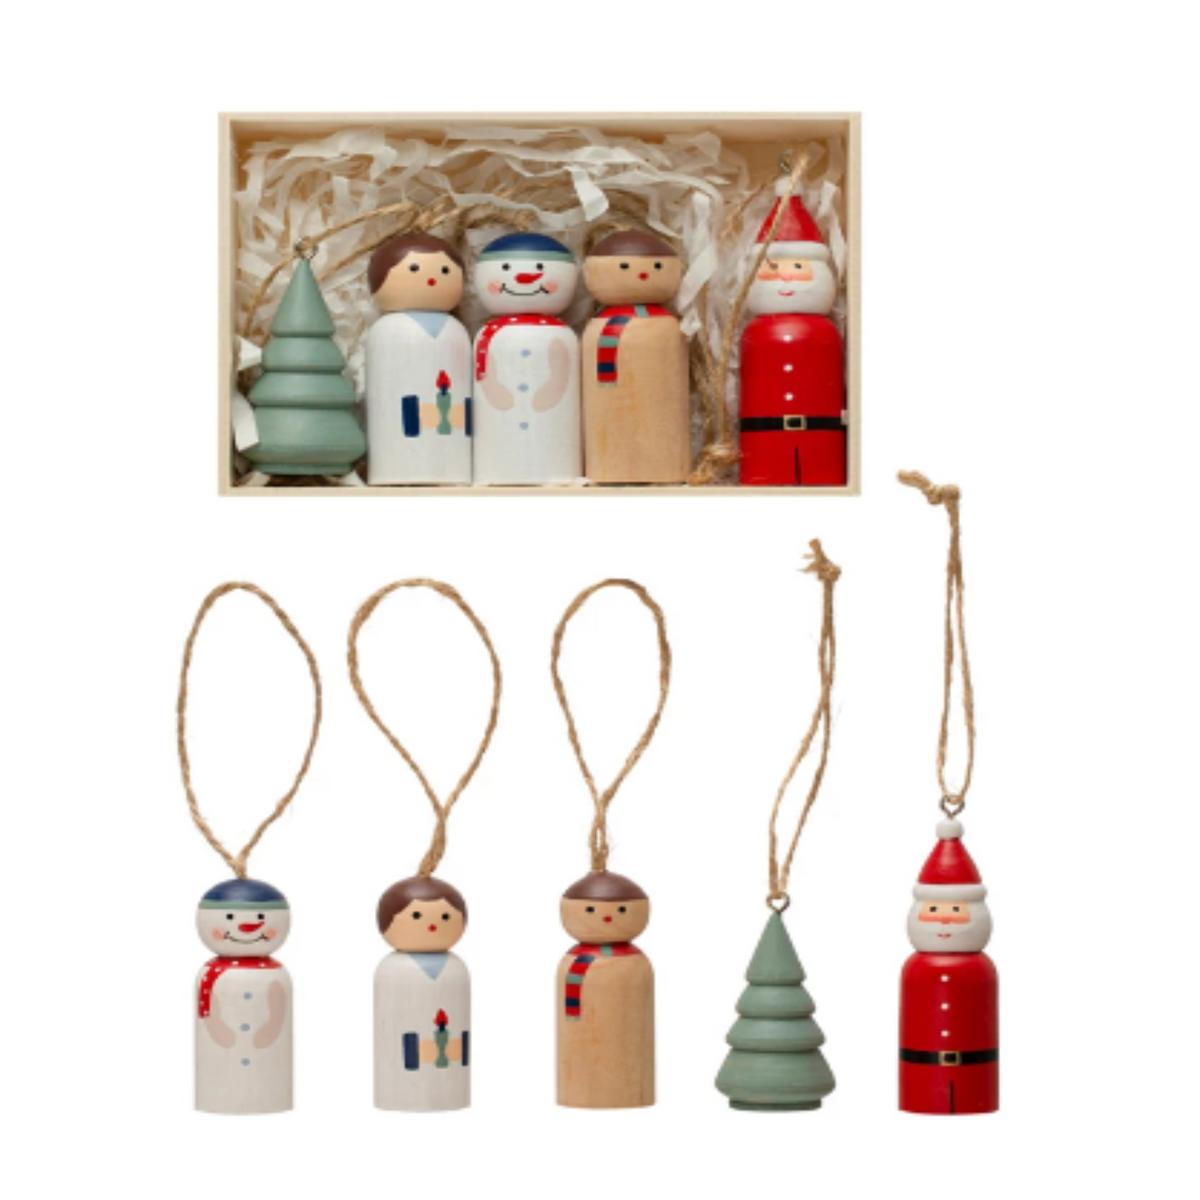 Hand-Painted Pine Wood Christmas Ornaments, Boxed Set of 5